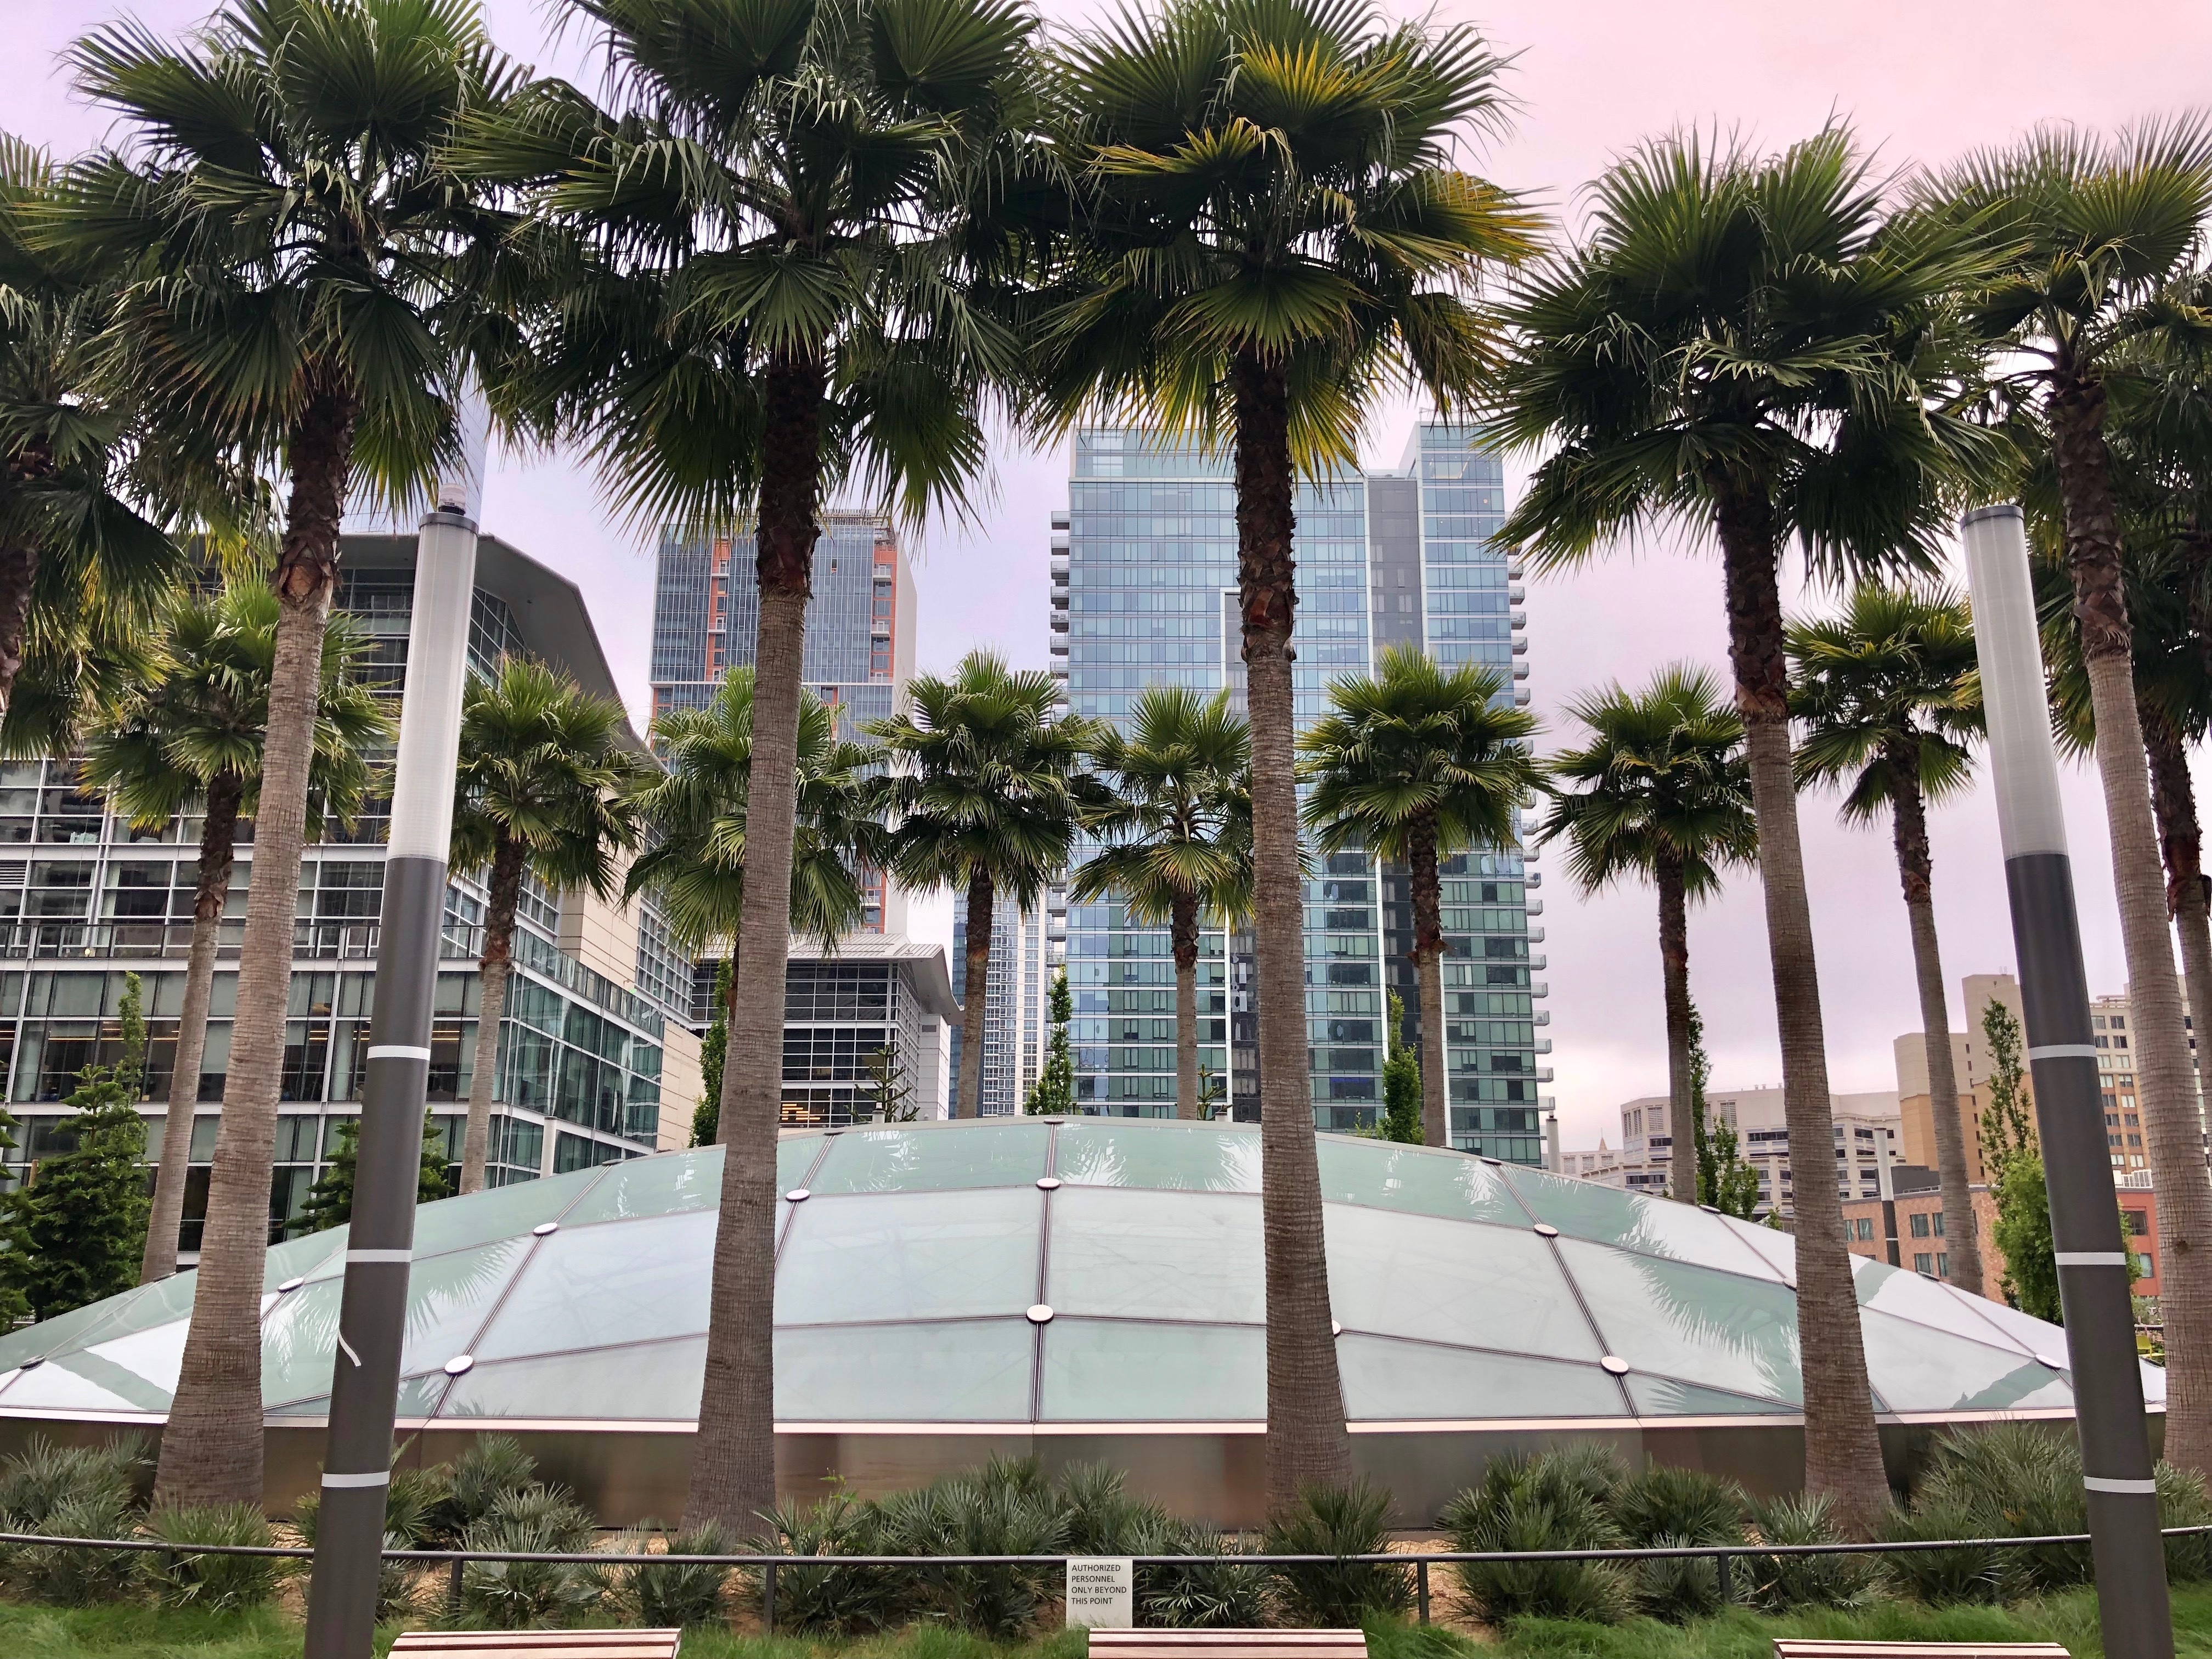 Atop Salesforce Park, a ring of palm trees with downtown SF in the distance.